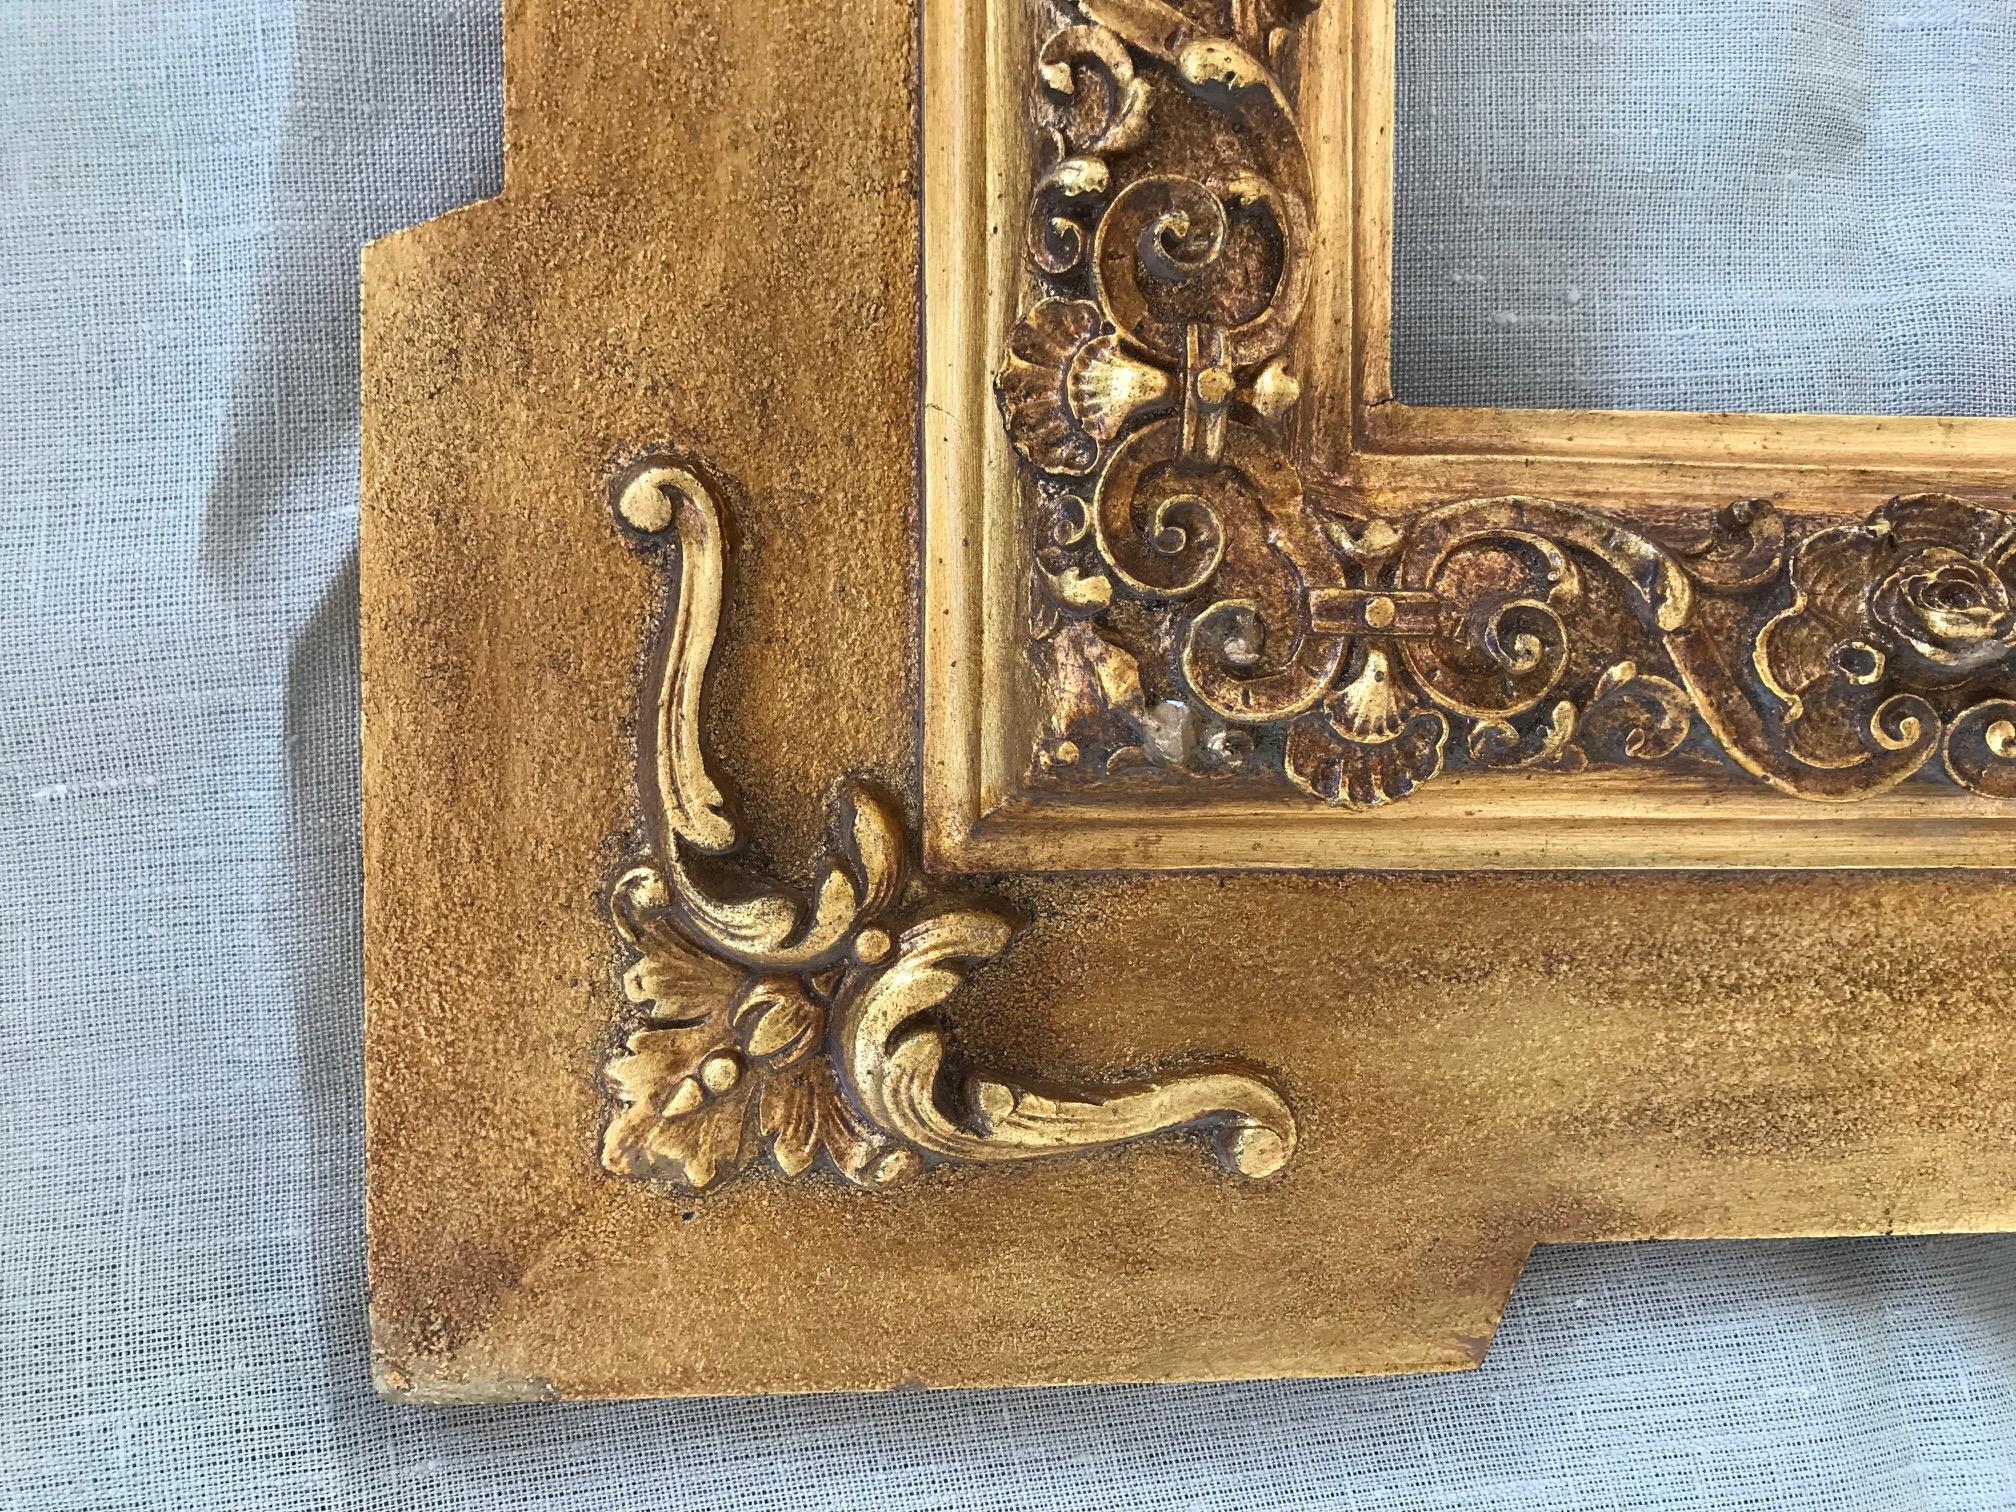 This is a carved and gilded wooden frame that presents some sizes distributed in bands. A slightly smooth outer edge already advances the predominance of the lines of the piece and towards the center an area worked with intertwined branches surround